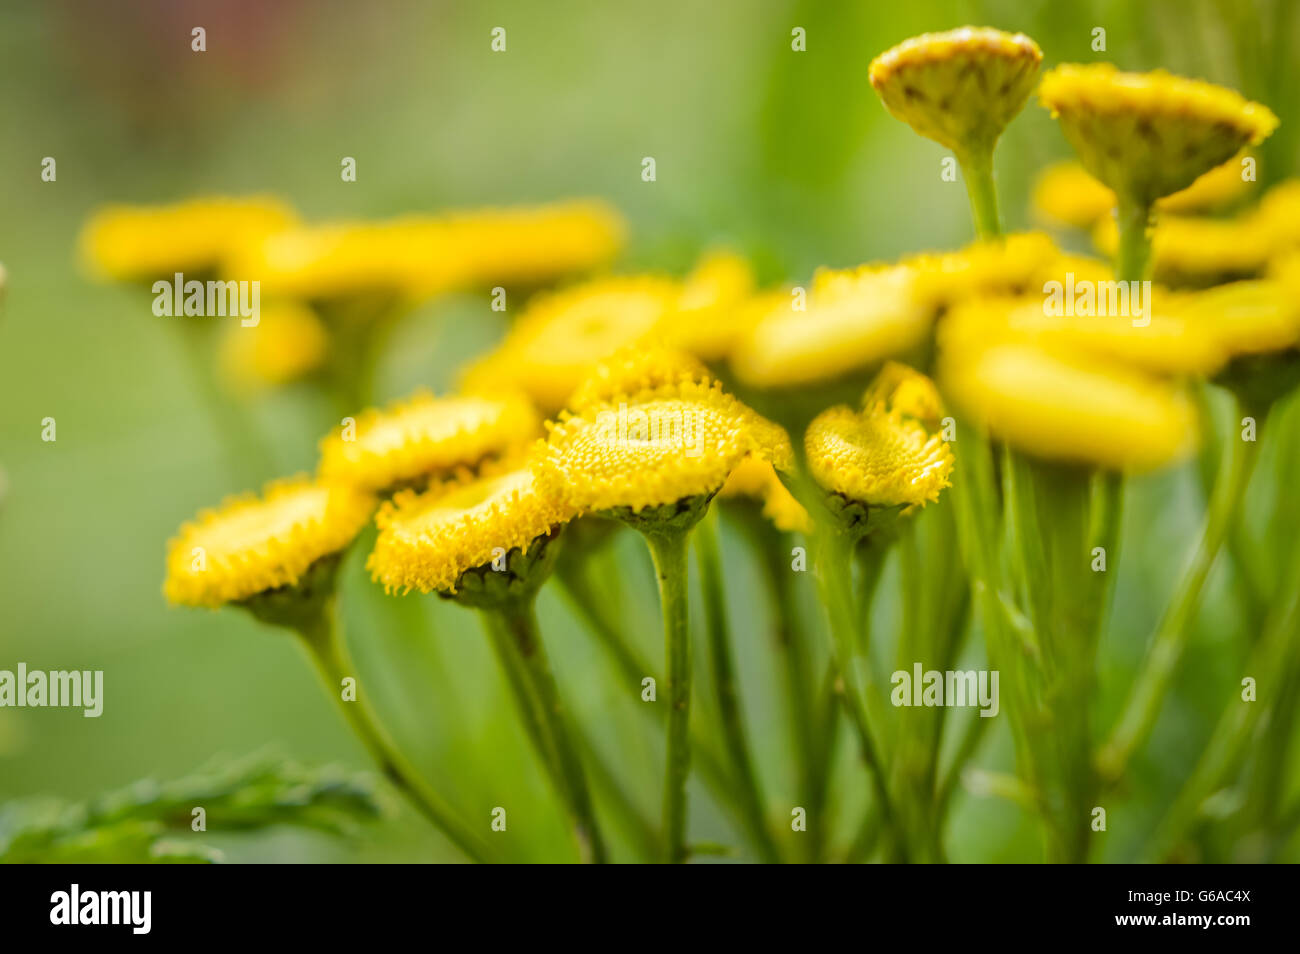 Tansy flowers close up Stock Photo